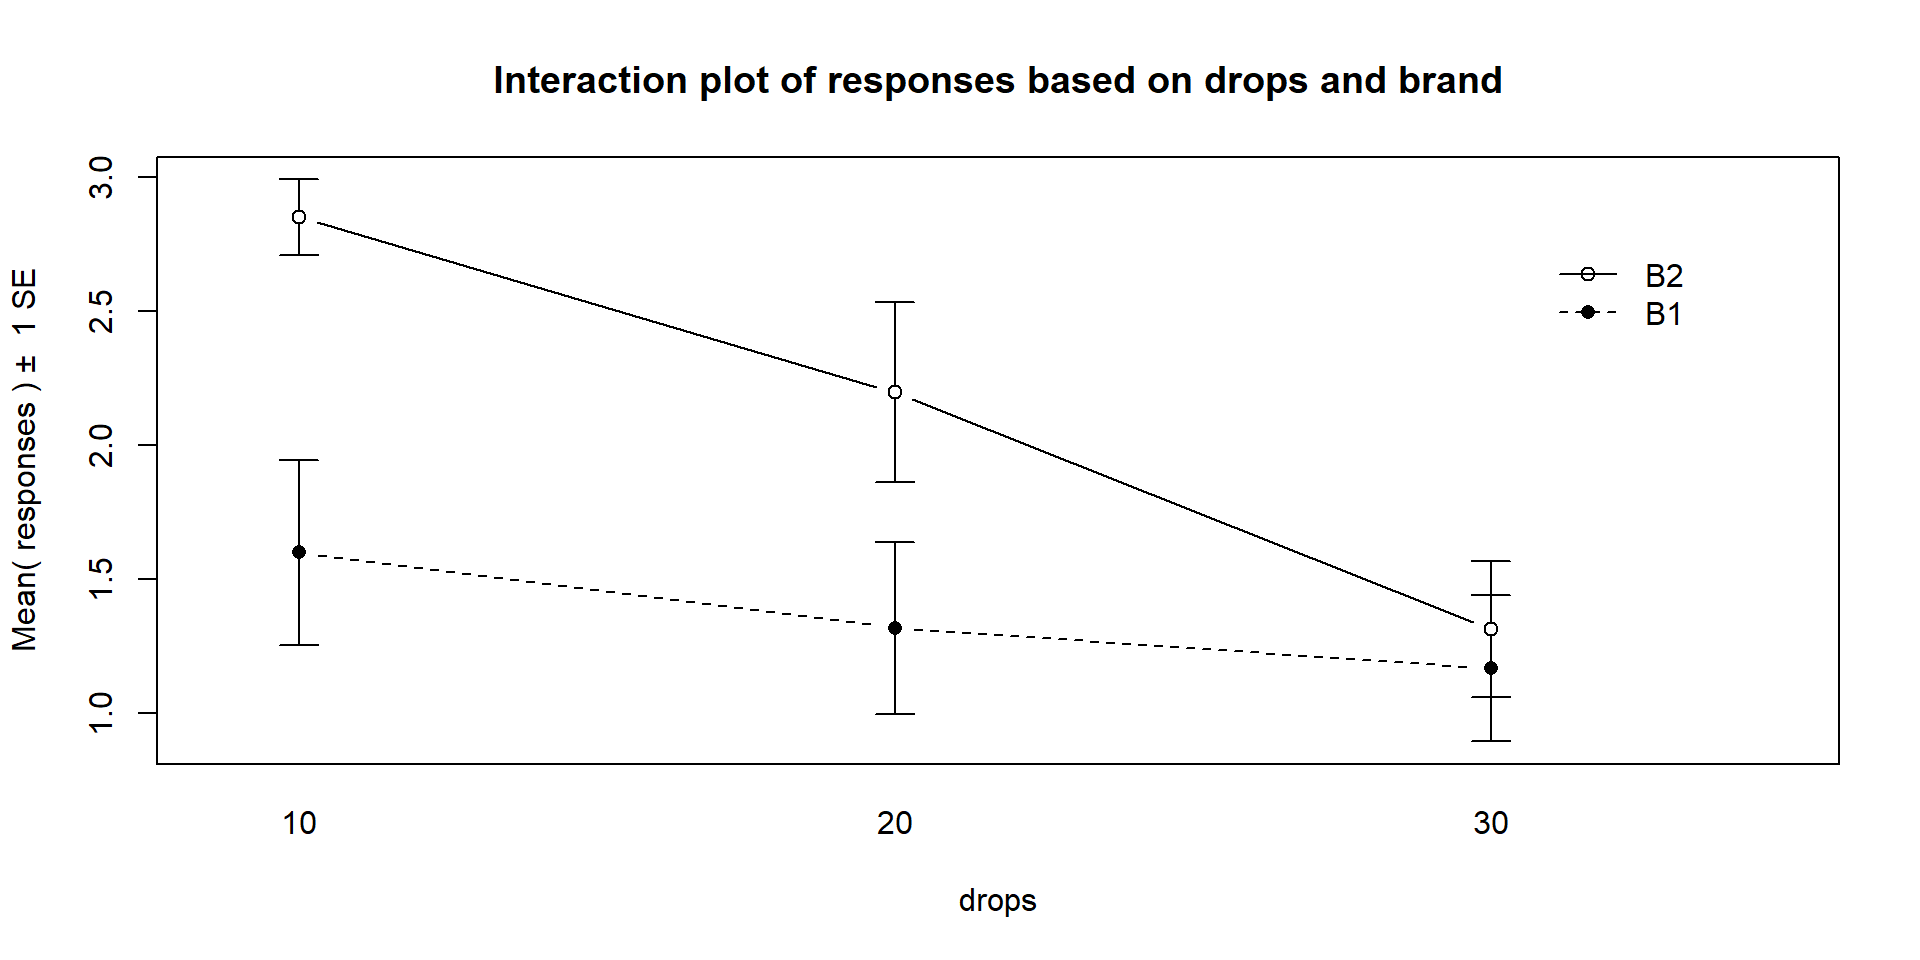 Interaction plot of the paper towel data with Drops on the x-axis and different lines based on Brand.